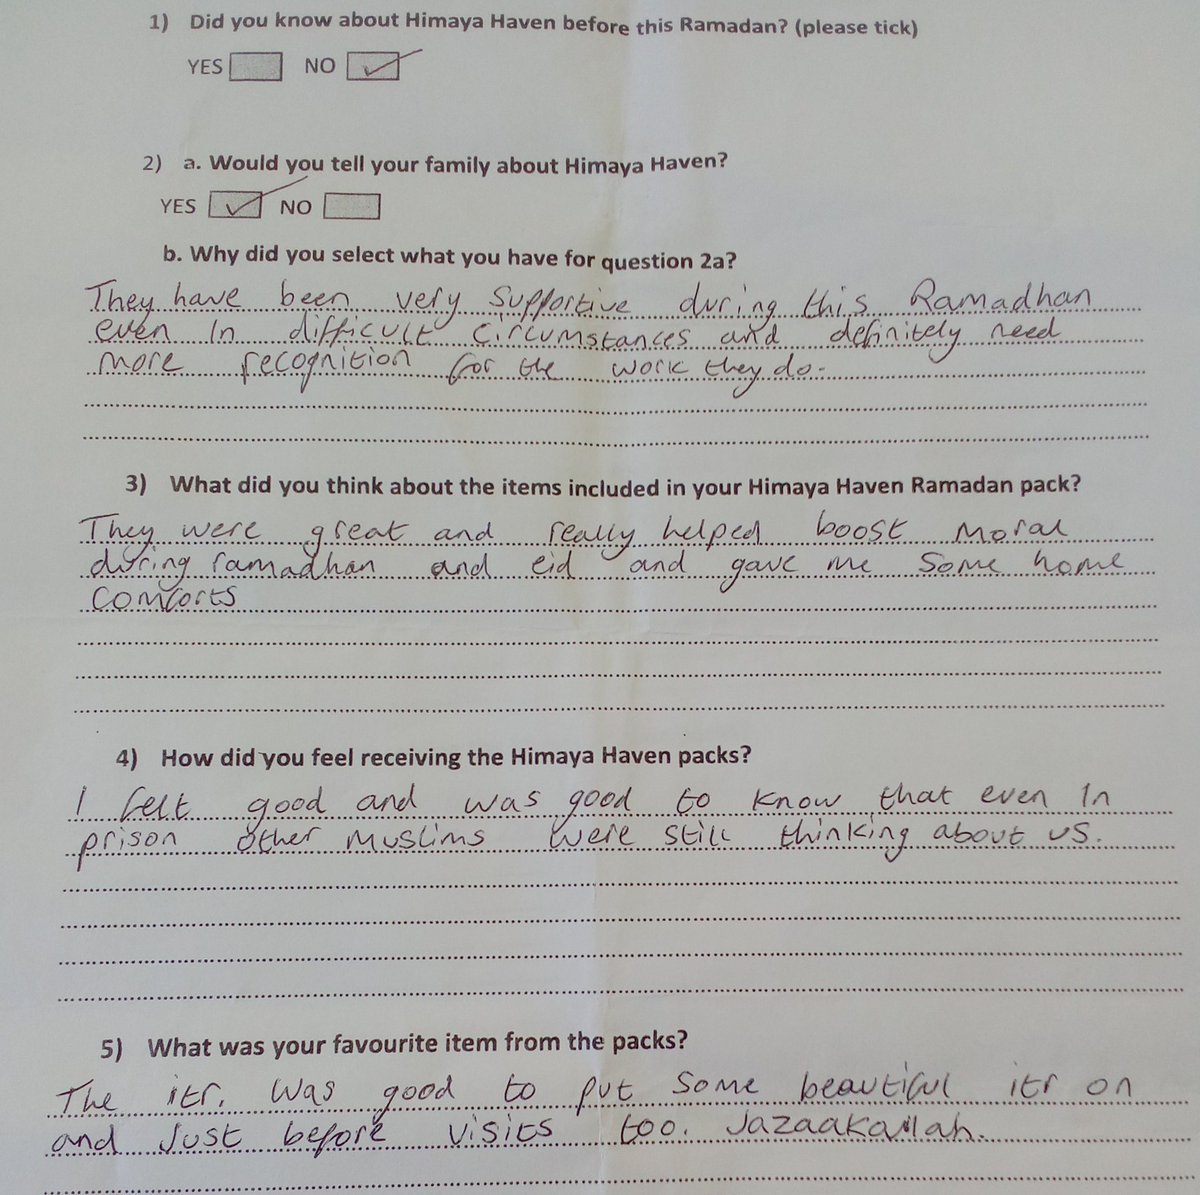 Here is more prisoner feedback, this is from another prisoner at @HMPSwinfenHall who stated the packs helped 'boost morale'
@MuslimWomenUK @NatalieBooth17 @RobertBuckland @ForwardPartners @HMPPS_Families